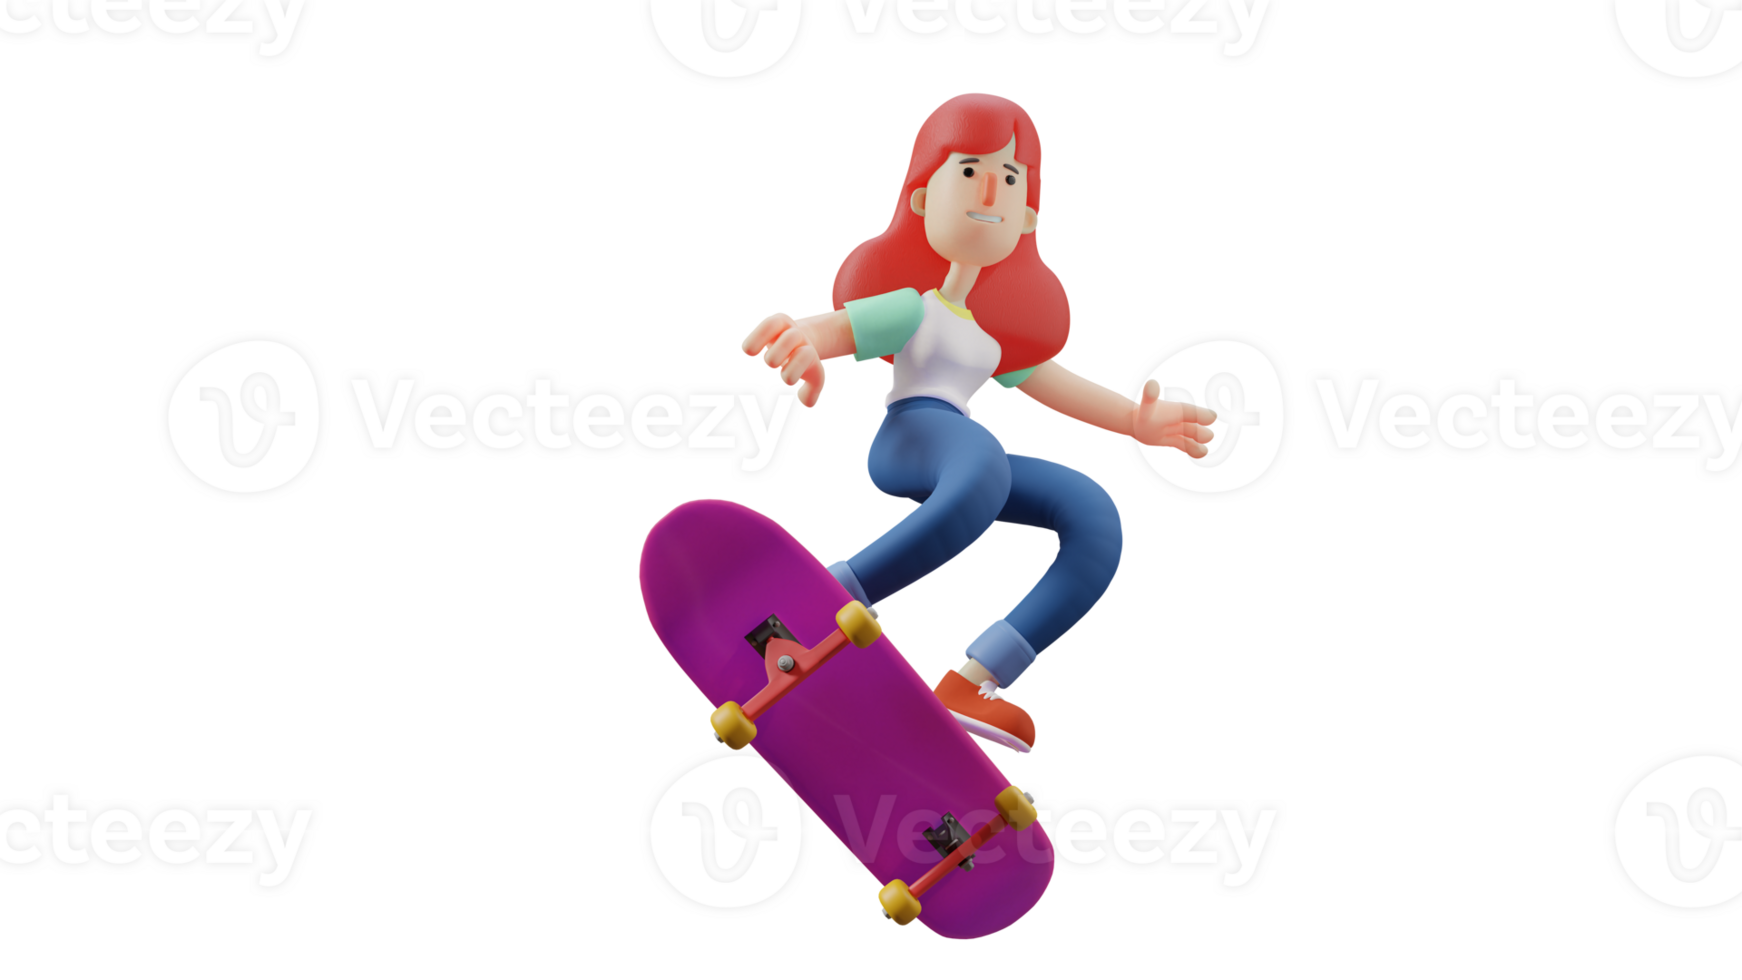 3D illustration. Cool Girl 3D Cartoon Character. Girl playing skateboard. Casually dressed woman showing happy expression. Young woman doing her hobby. 3D cartoon character png